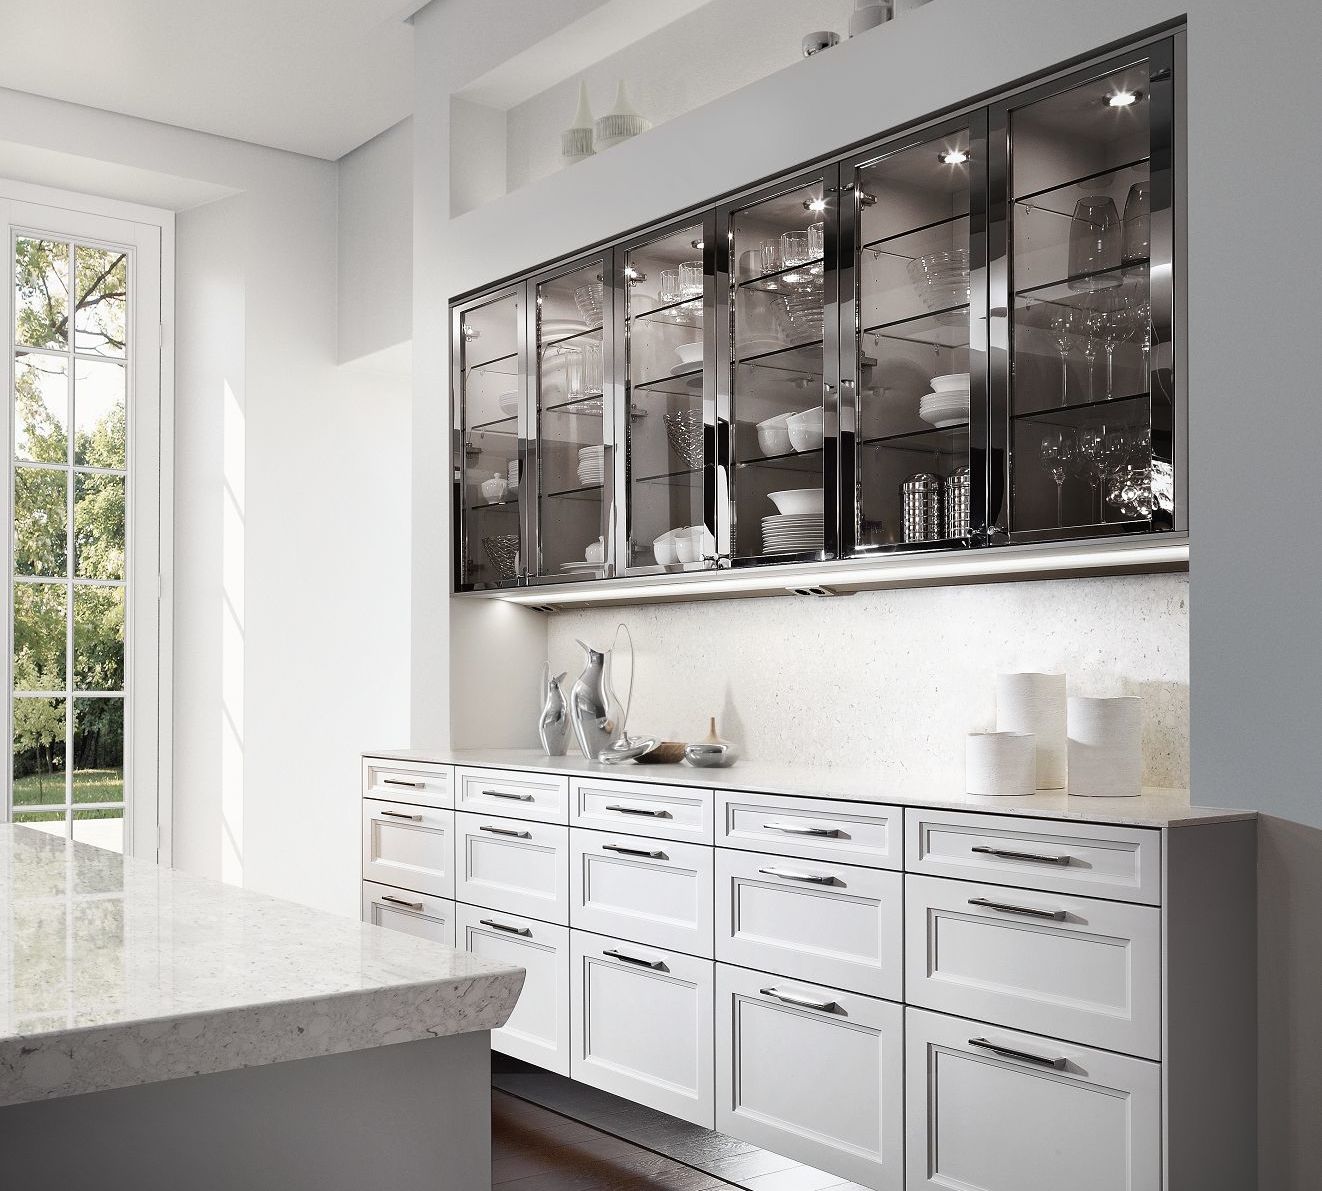 SieMatic Classic BeauxArts S2 in lotus white with glass cabinets framed in polished nickel